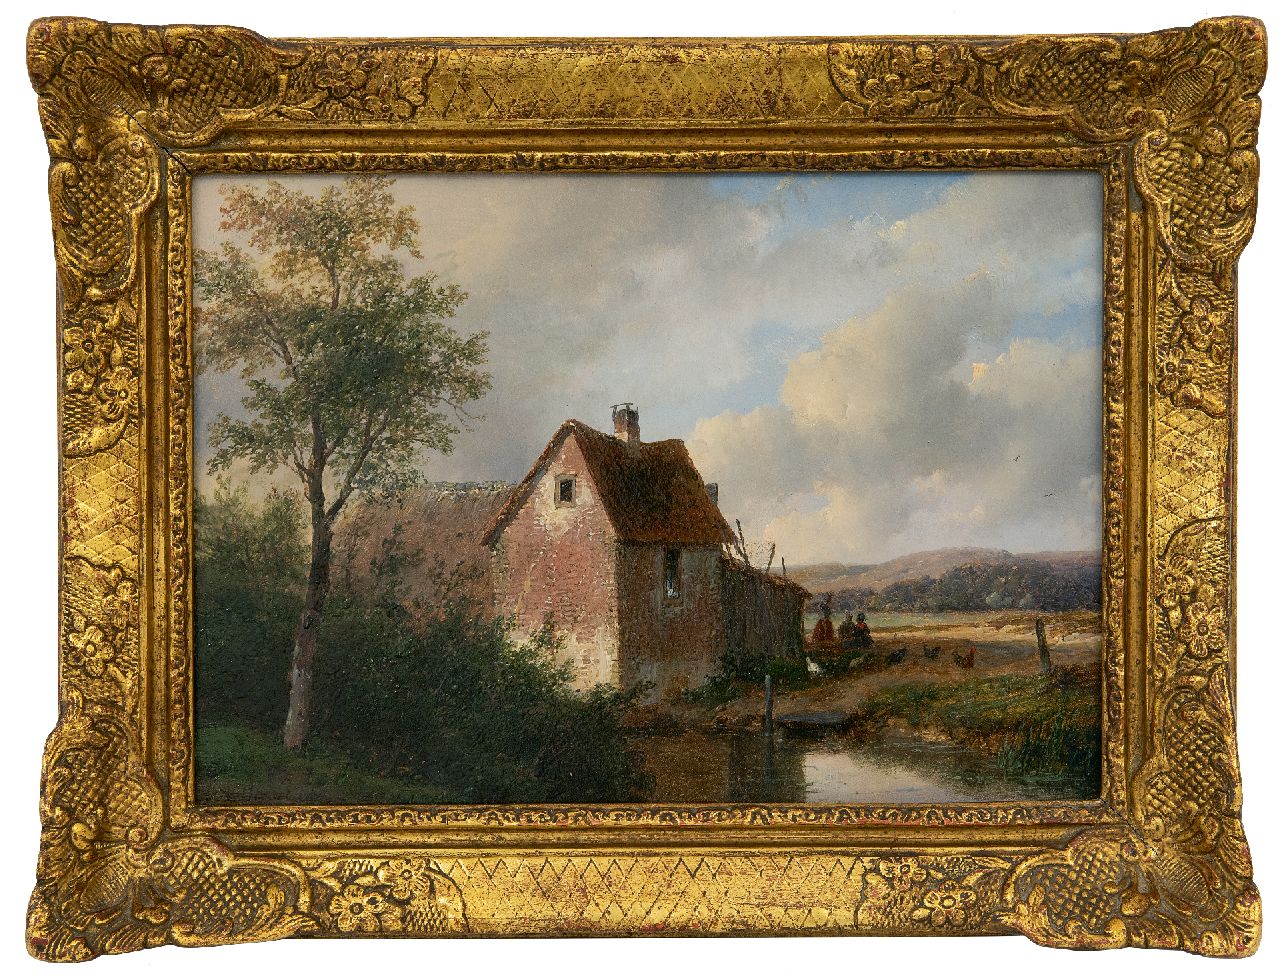 Schelfhout A.  | Andreas Schelfhout | Paintings offered for sale | Landscape witha  farm, oil on panel 20.5 x 28.5 cm, signed l.l. and dated 1866